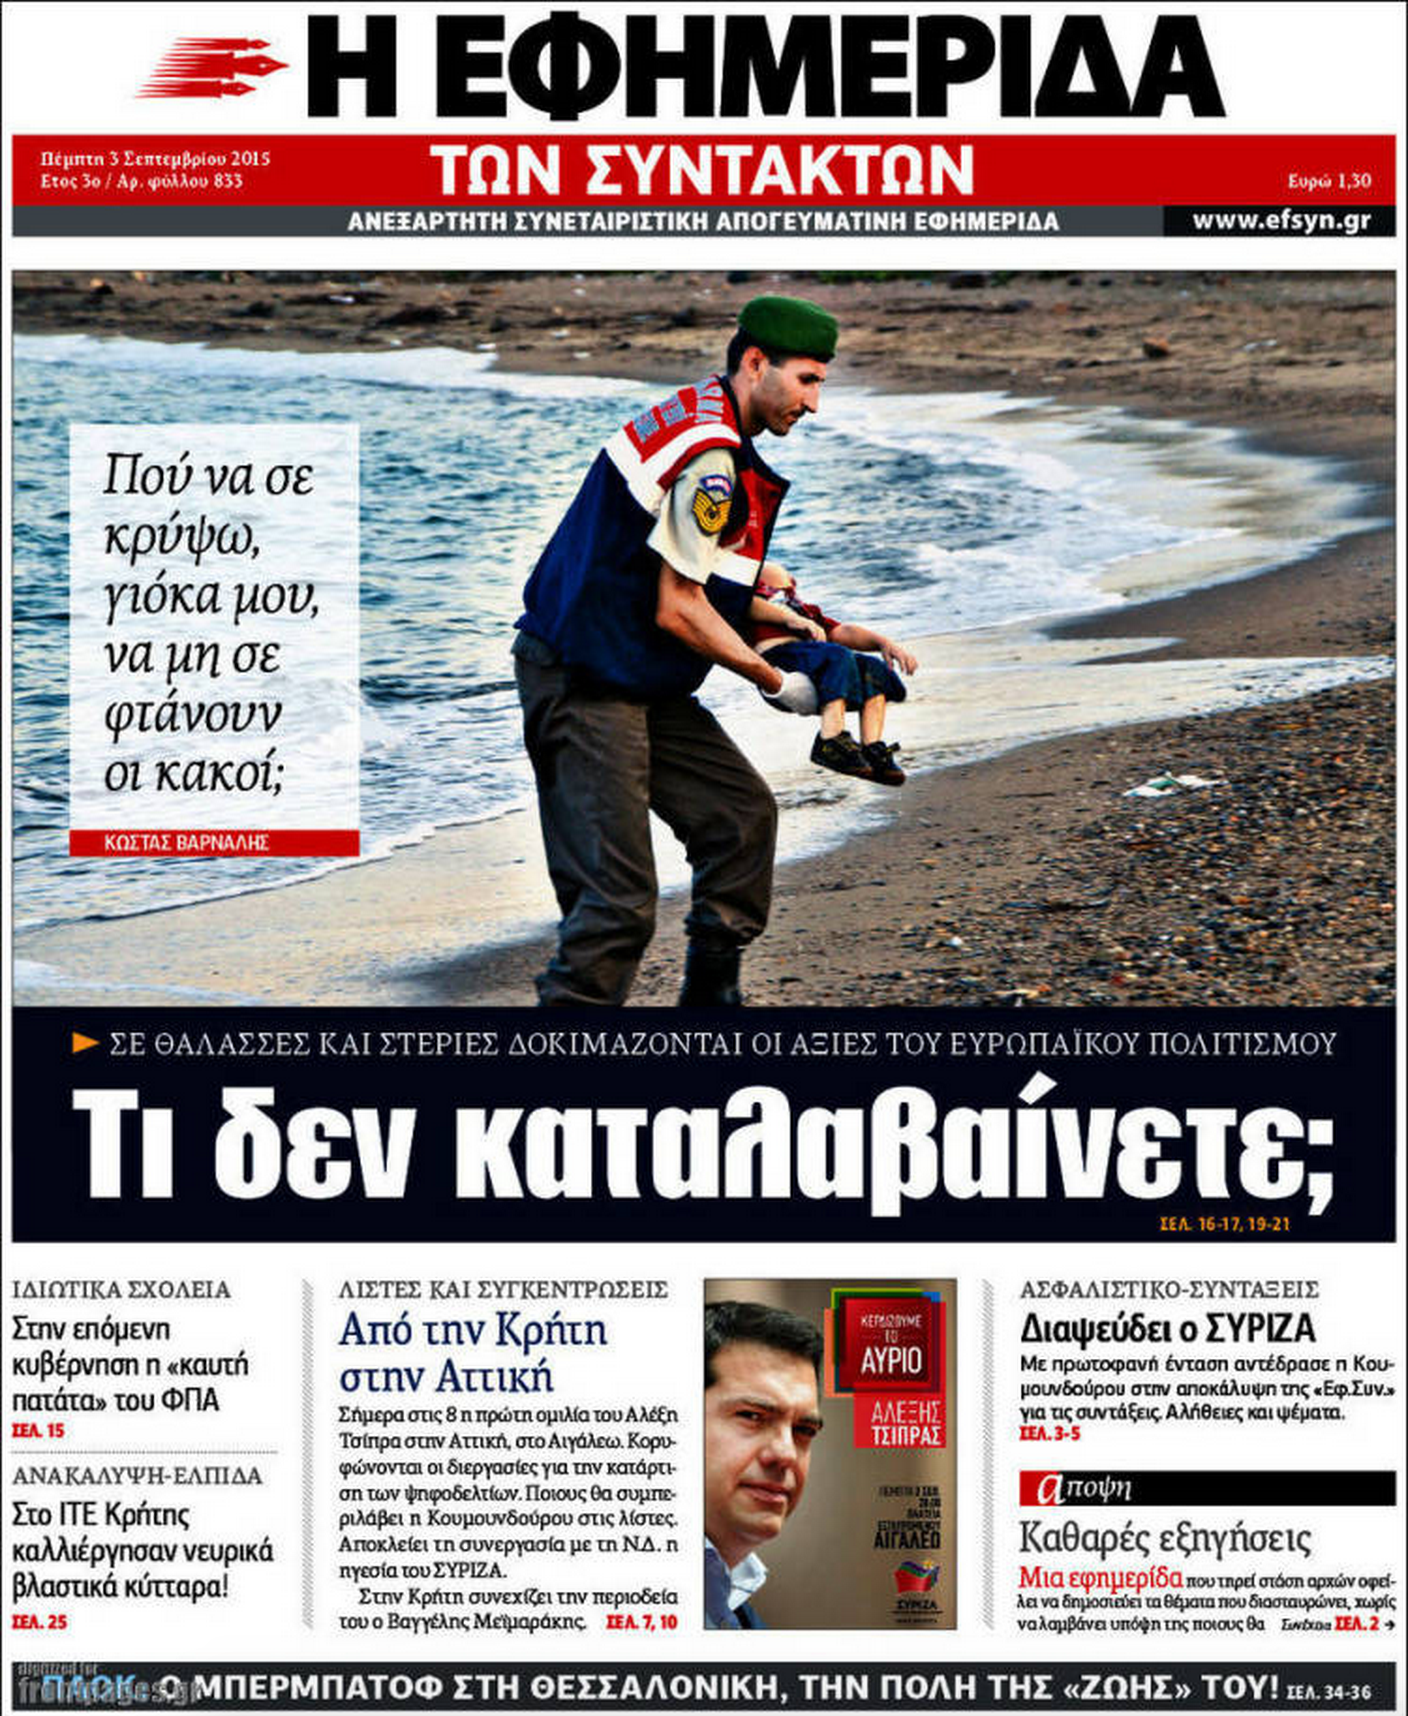 Drowned Migrant Boy EfSyn Front Page